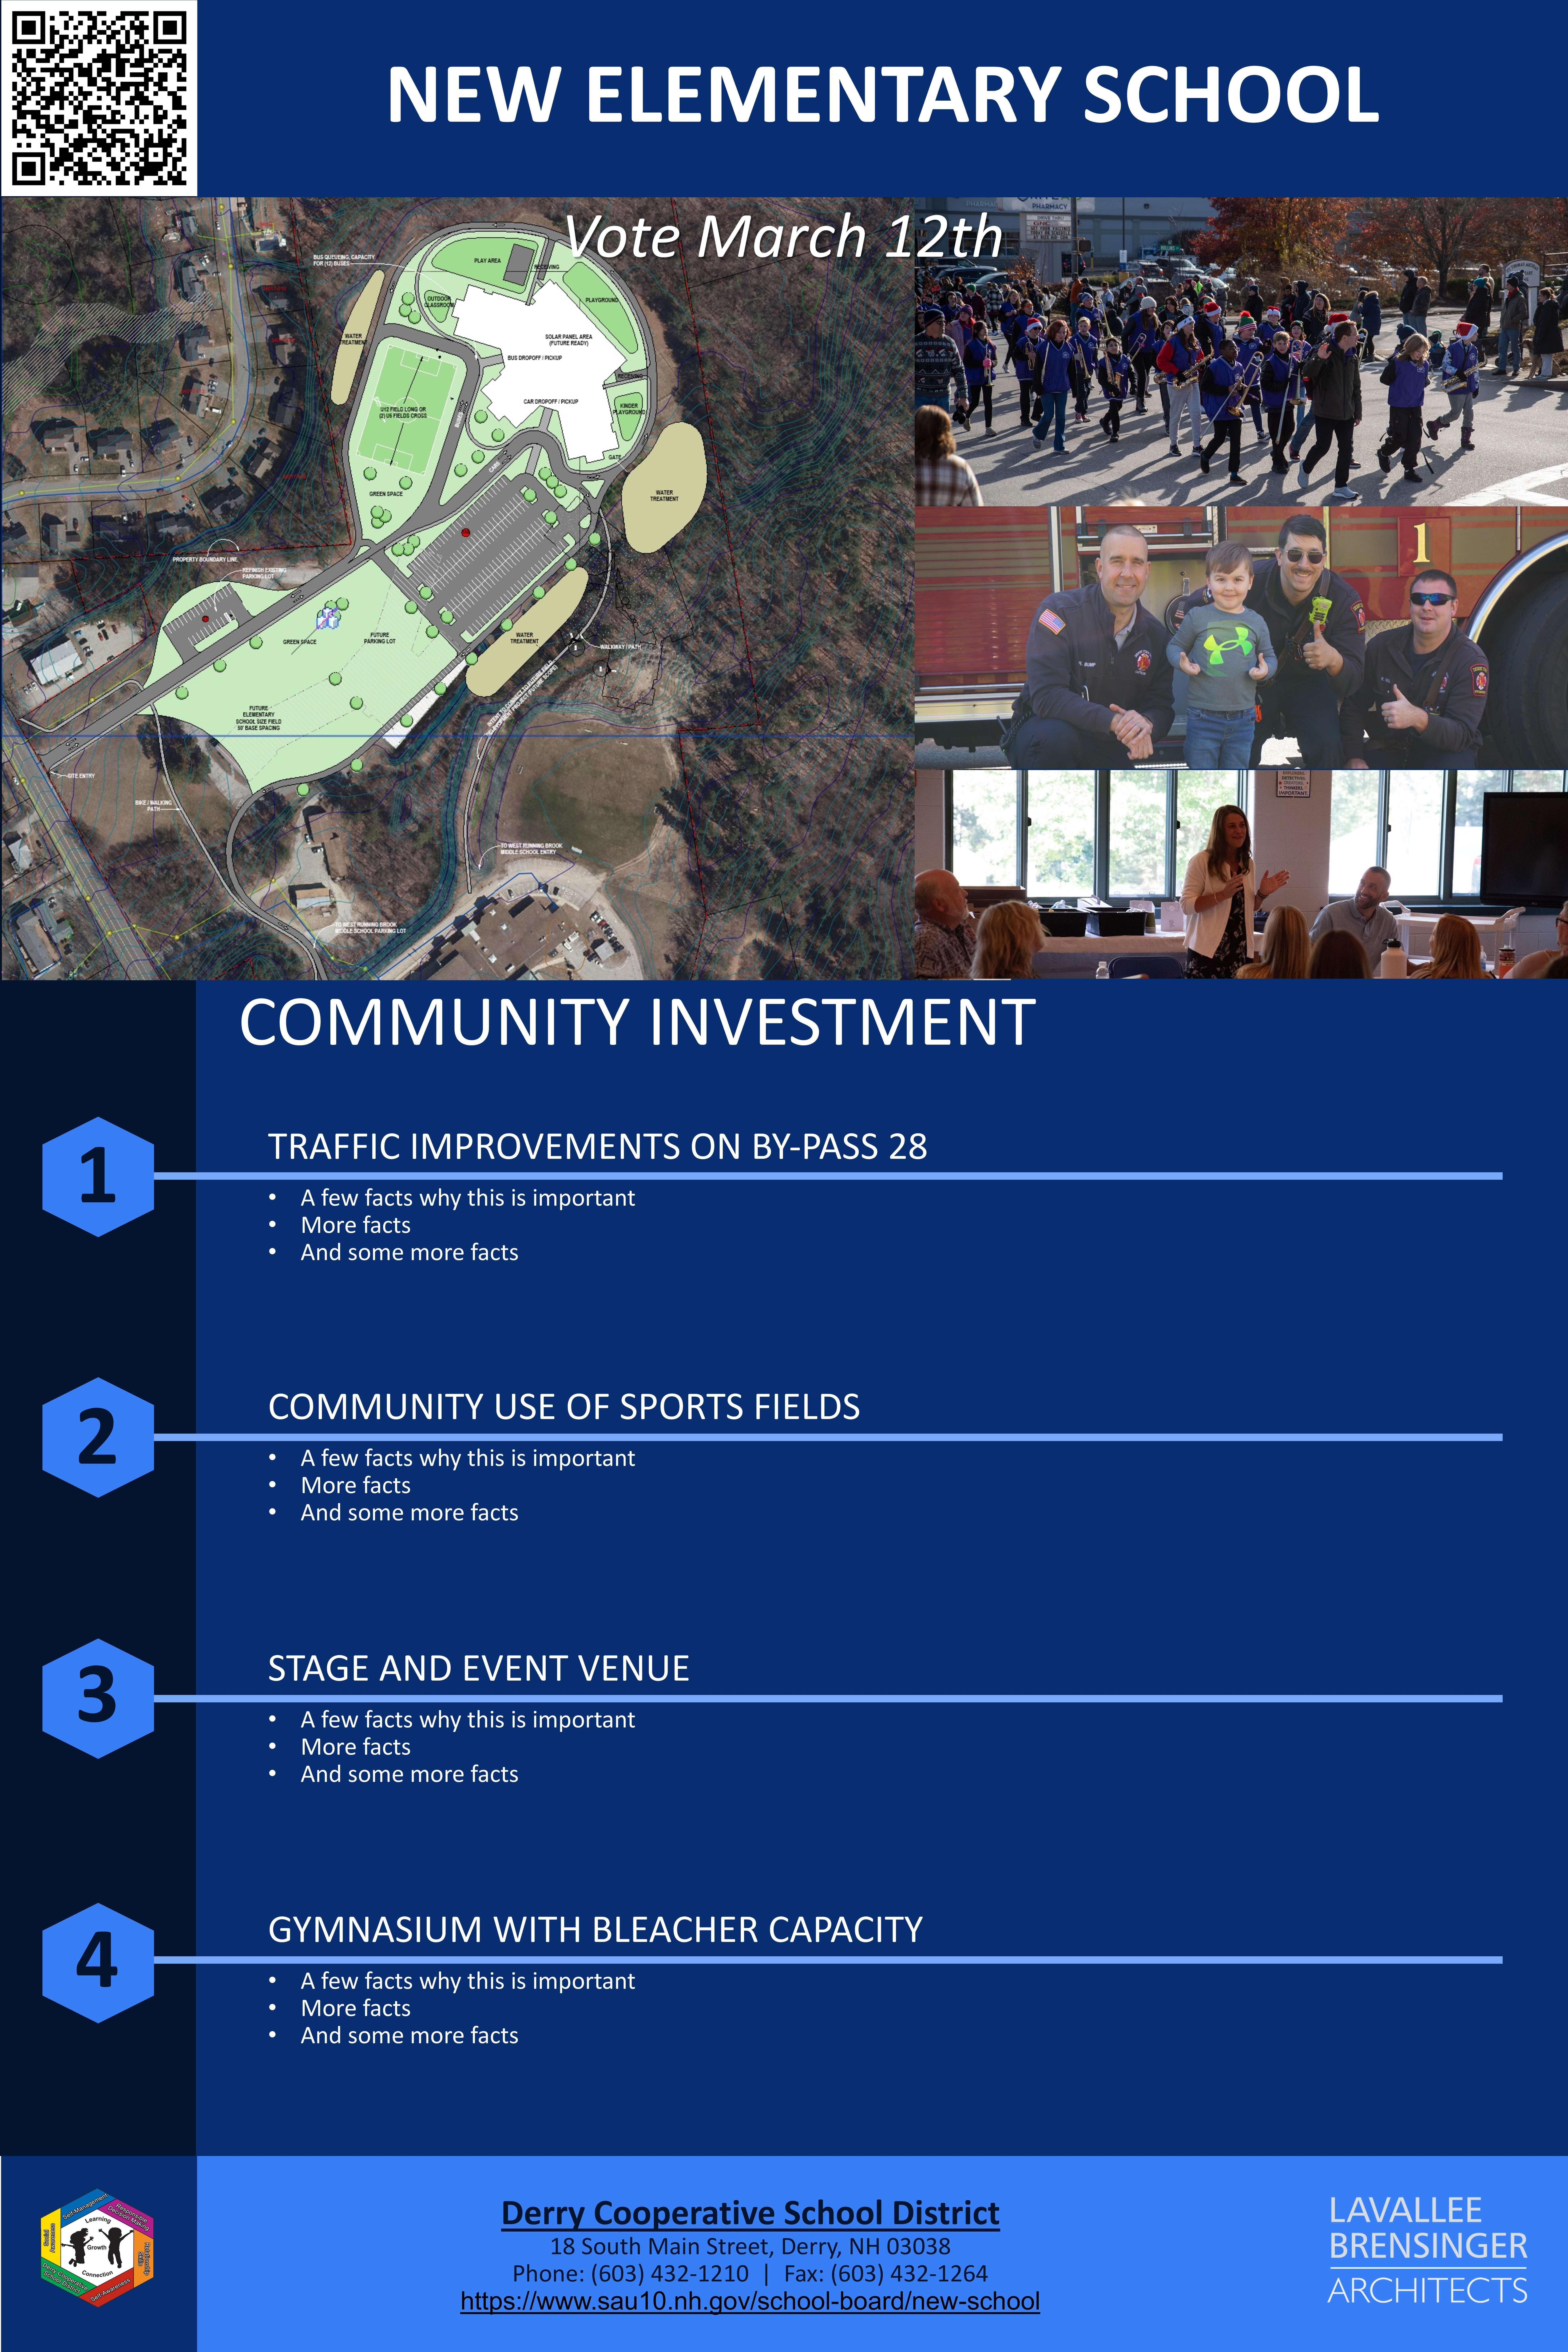 Read More New Elementary School Community Investment